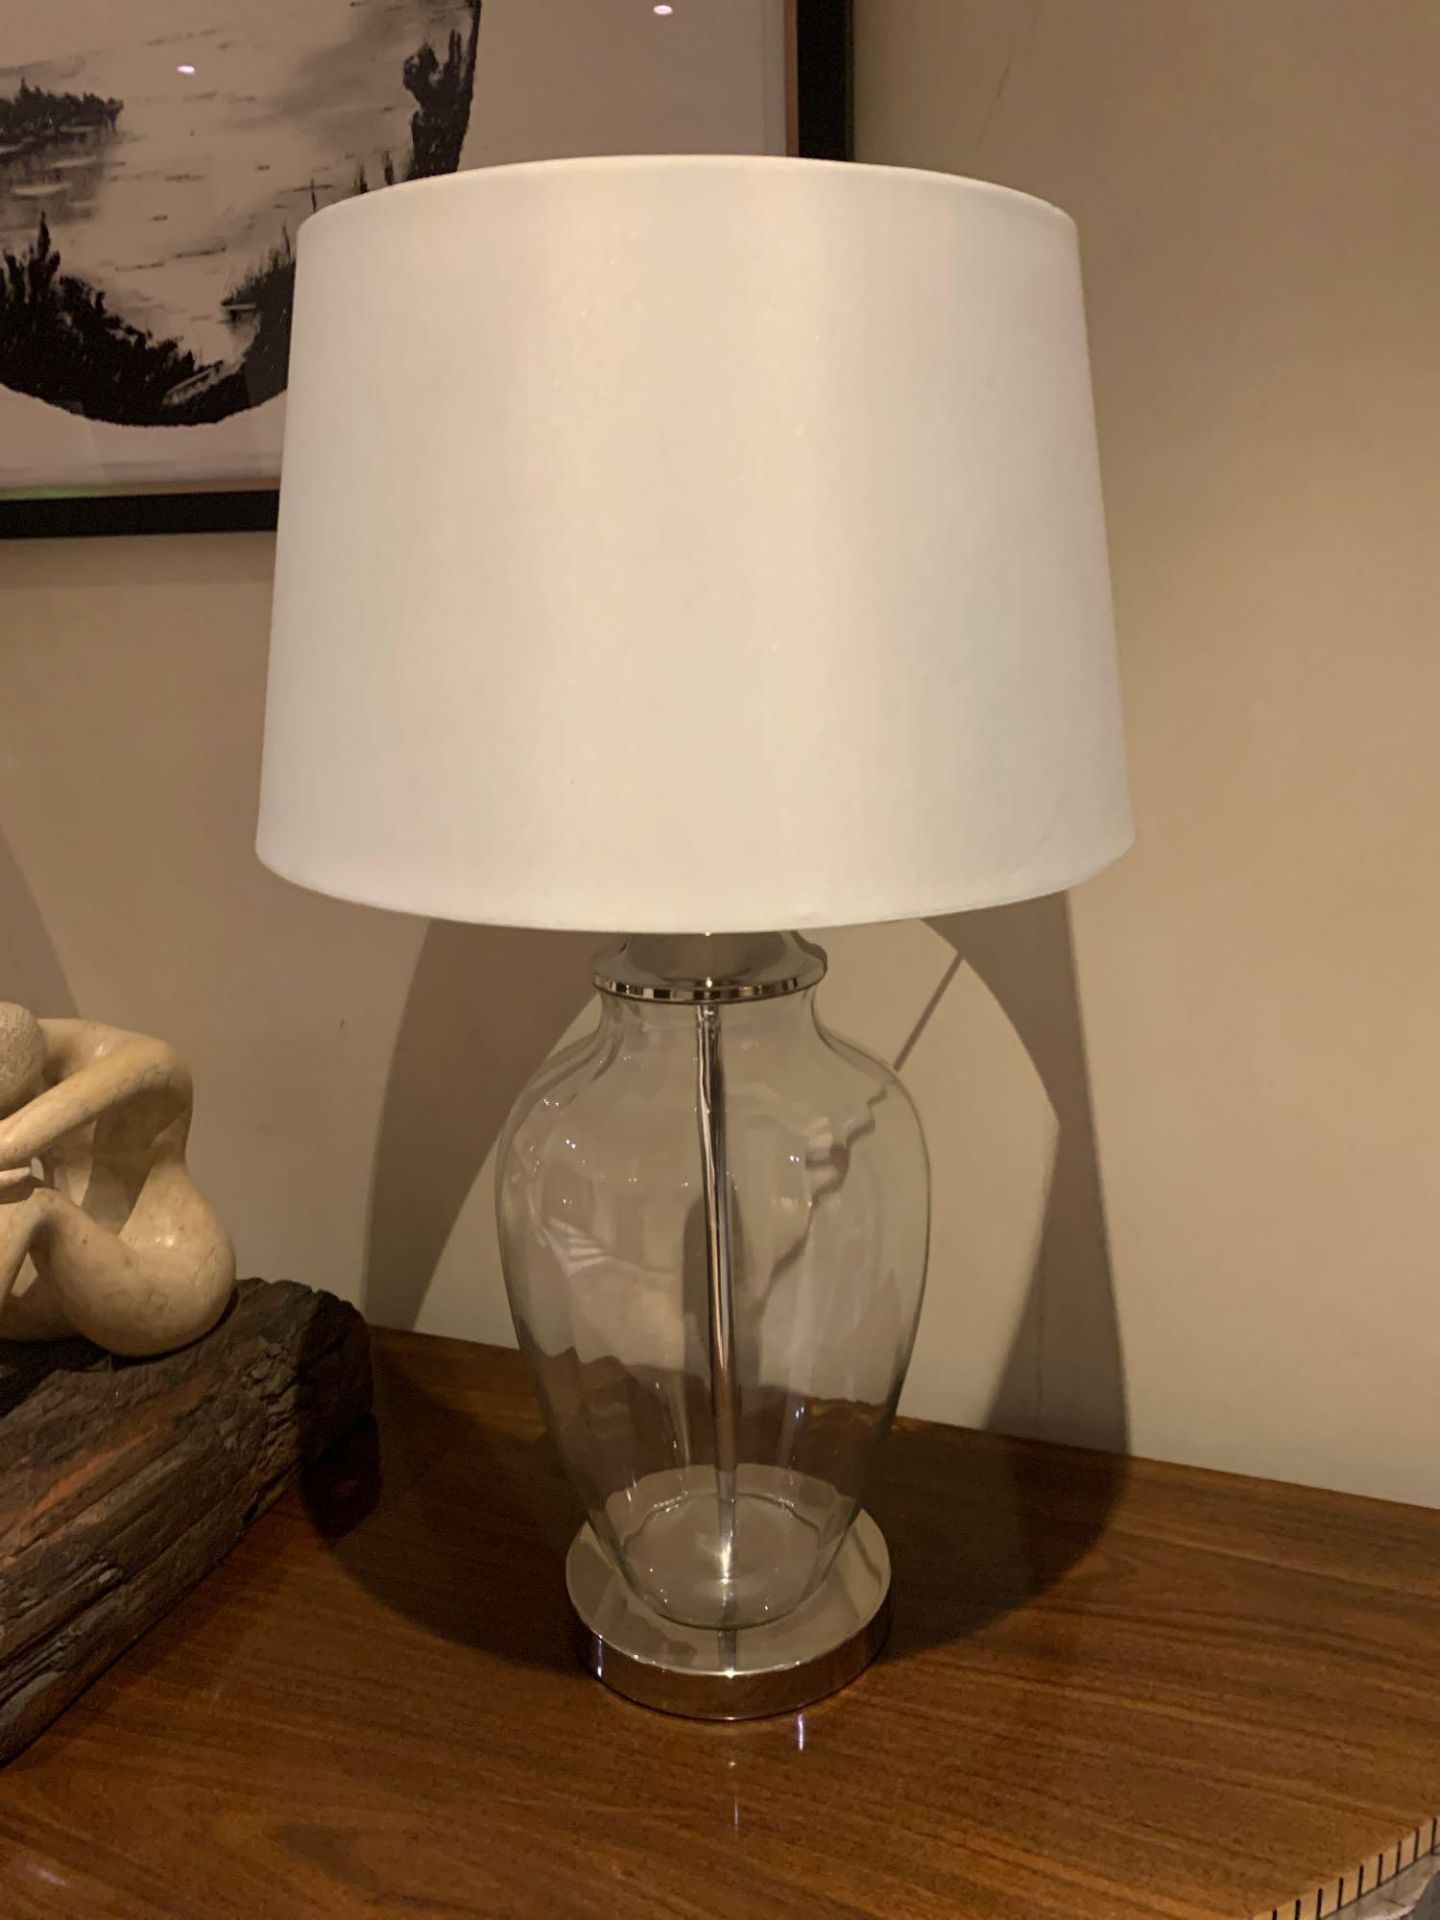 A Pair Of R V Astley Caballo Table Lamp 5178 ( Including Shade ) The Caballo Glass Table Lamp With - Image 2 of 4